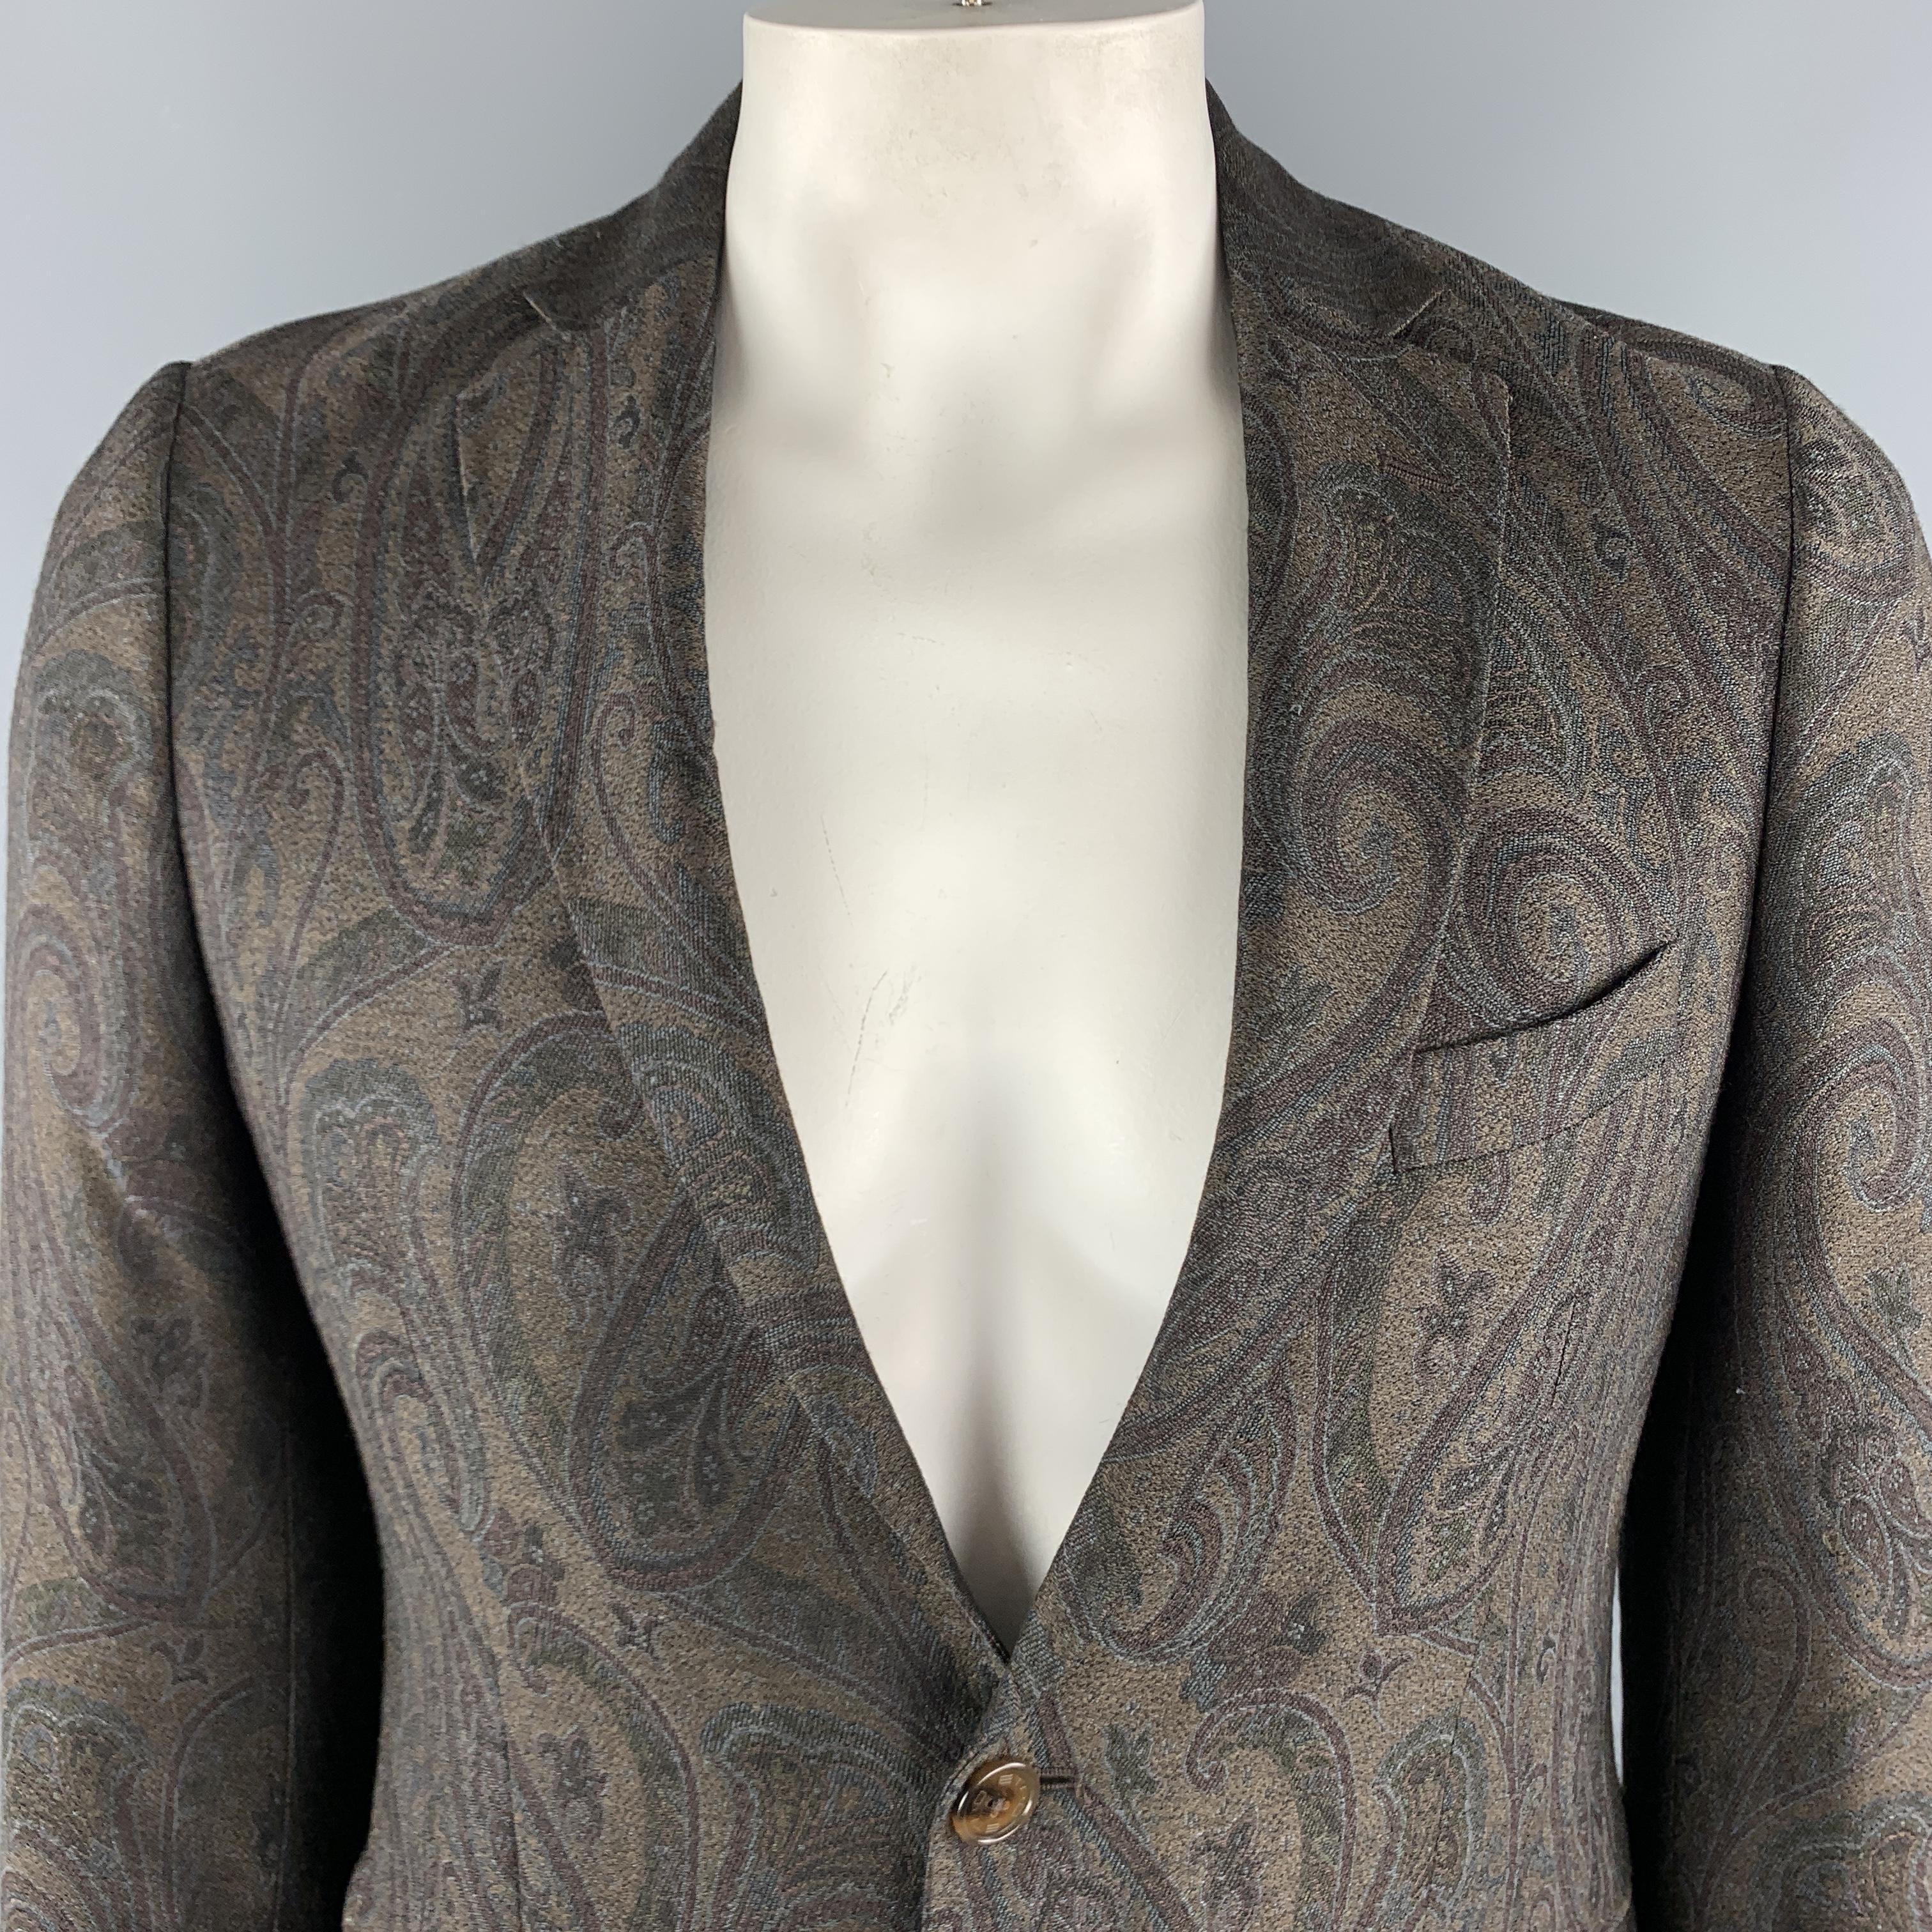 ETRO Sport Coat comes in a brown paisley wool / silk material, with a notch lapel, slit and flap pockets, two buttons at closure, single breasted, buttoned cuffs and a double vent at back. Made in Italy. 

Excellent Pre-Owned Condition.
Marked: IT